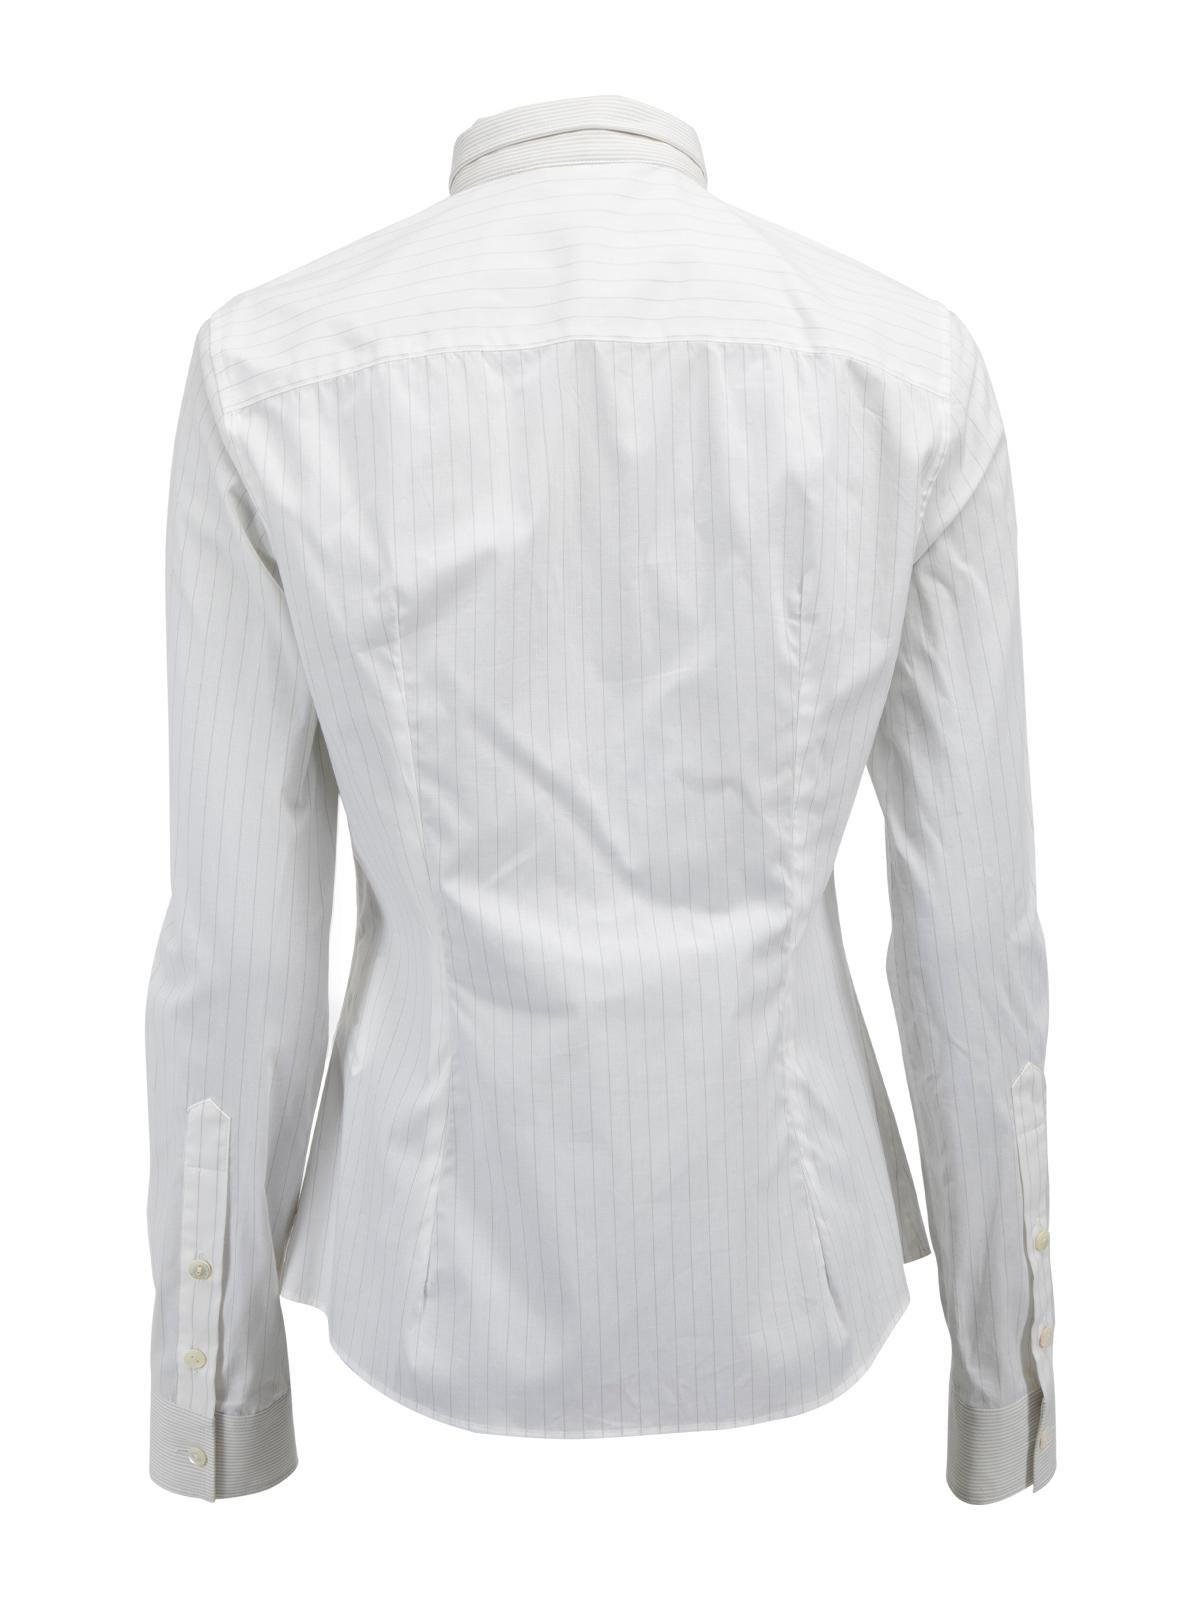 Pre-Loved Dolce & Gabbana Women's White Striped Cotton Shirt with Detachable In Excellent Condition For Sale In London, GB